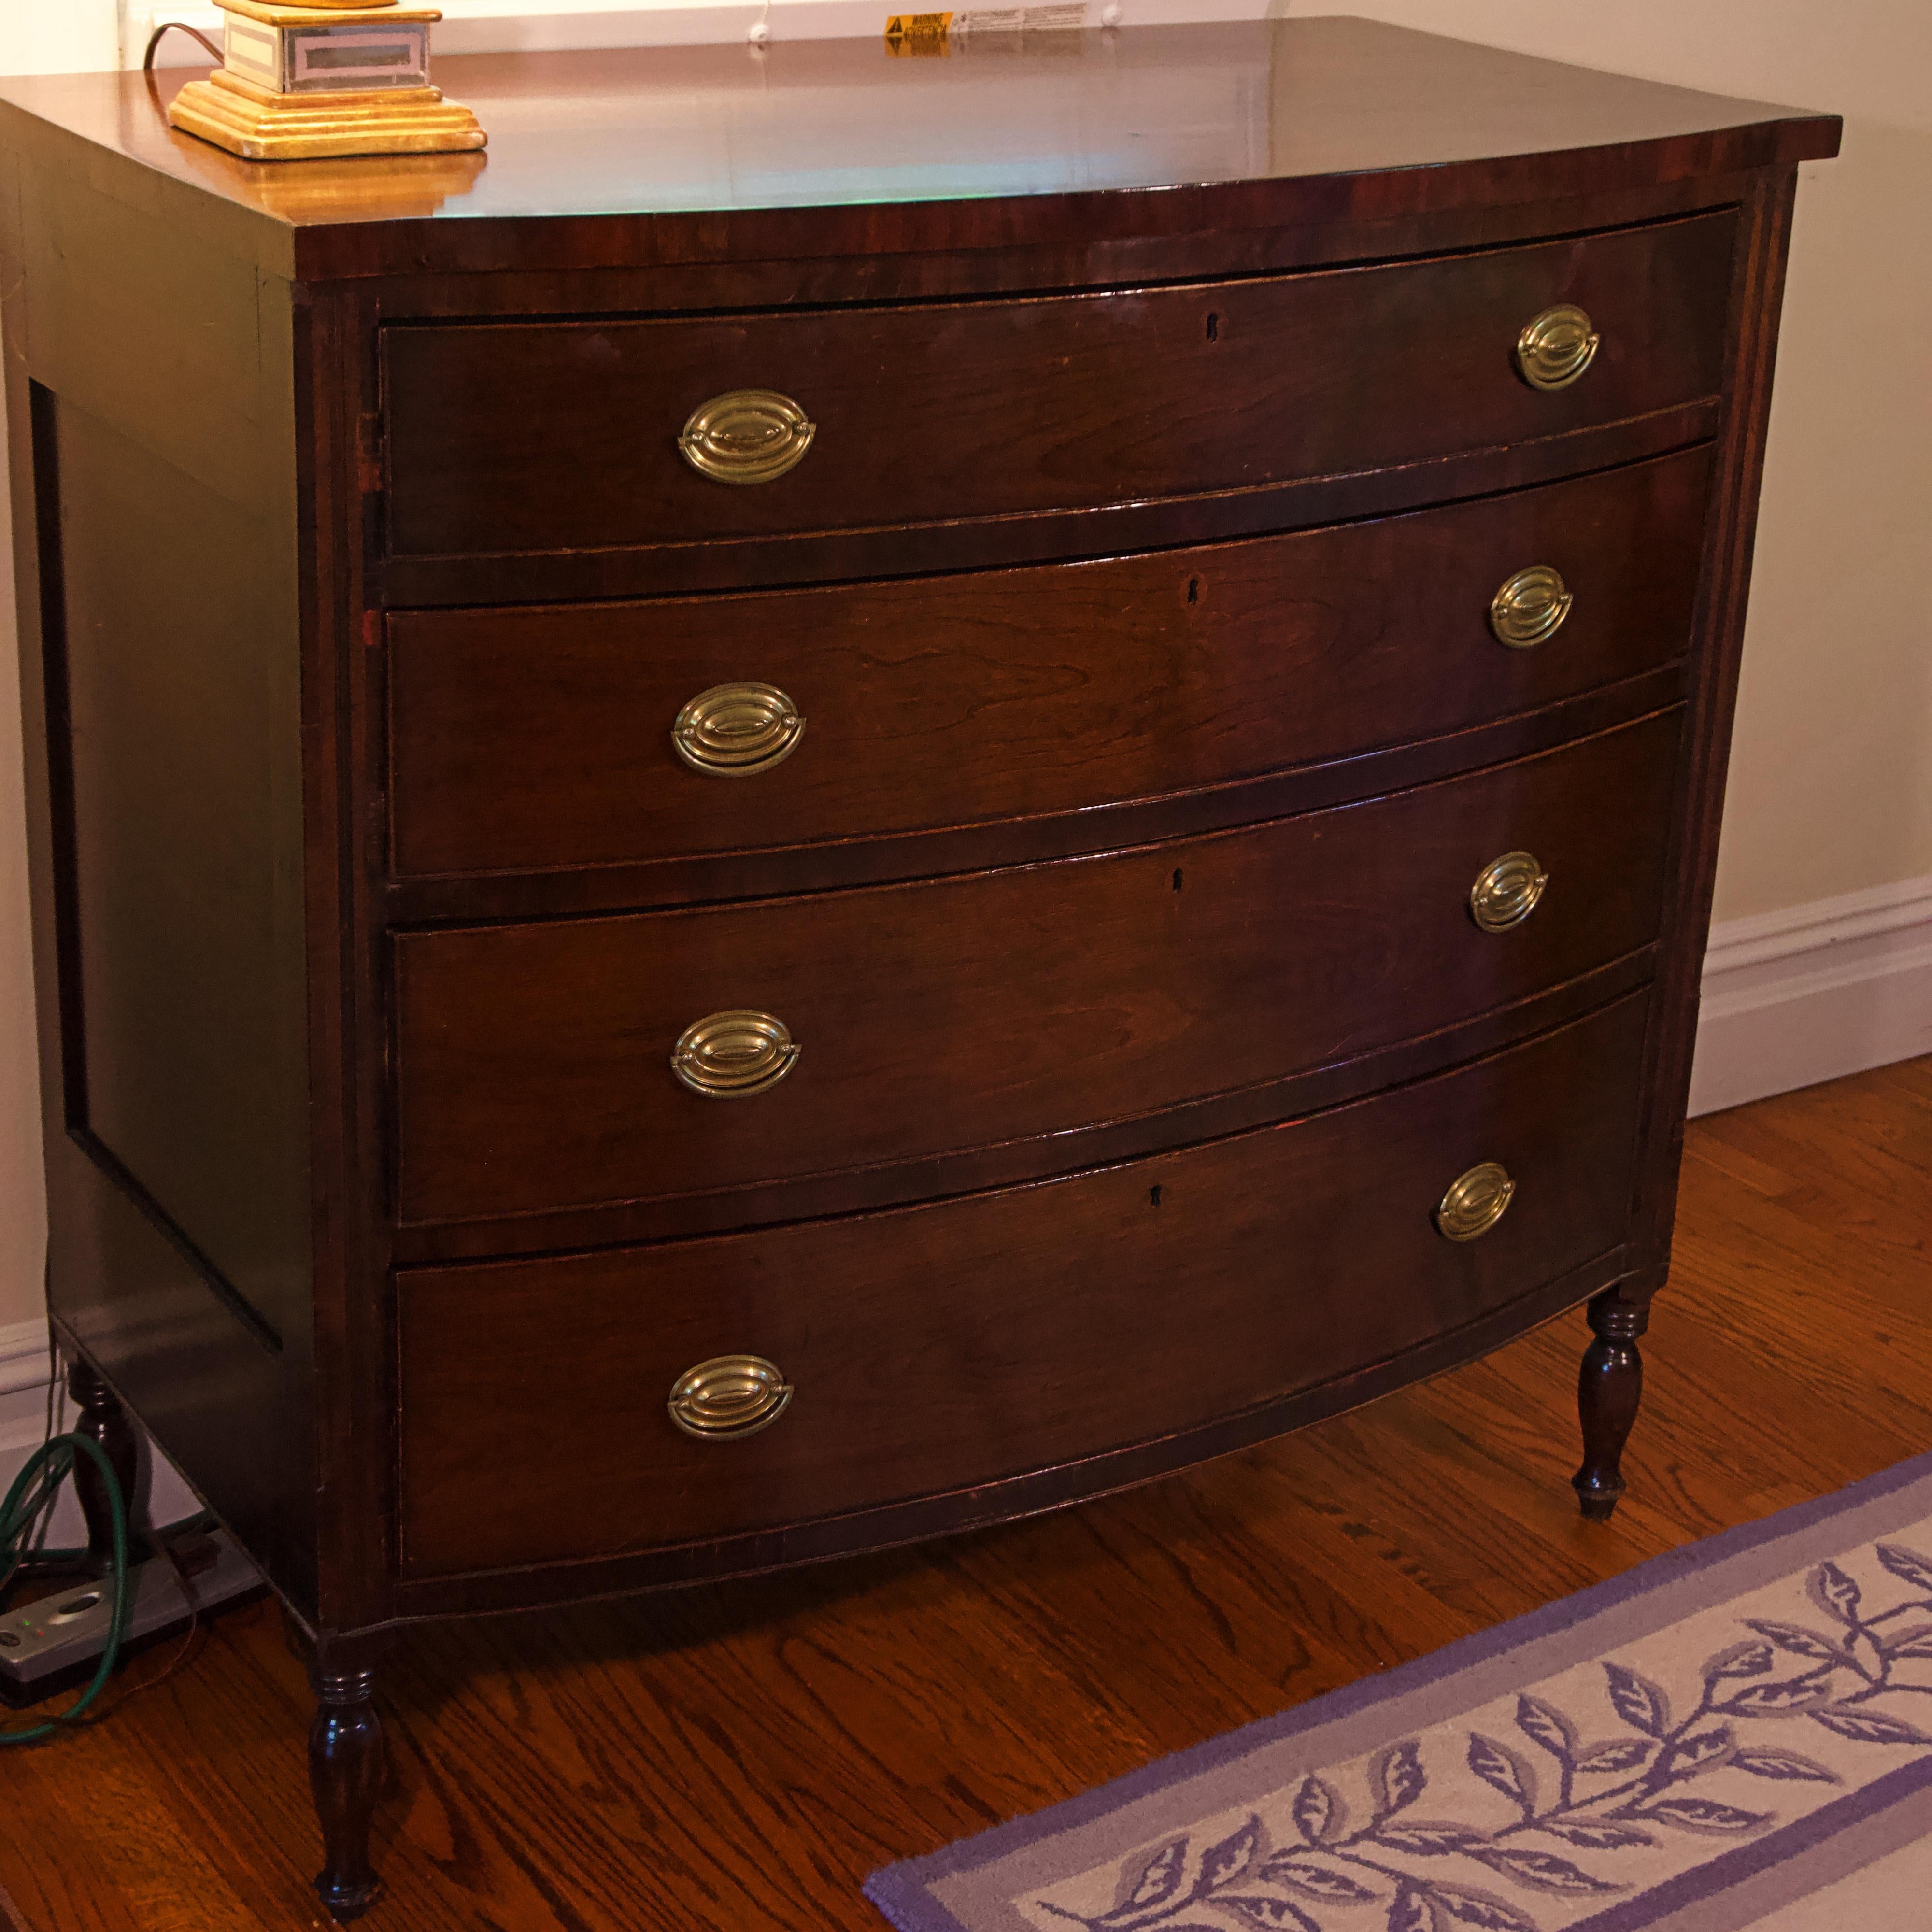 Walnut chest of drawers. American, 19th century.